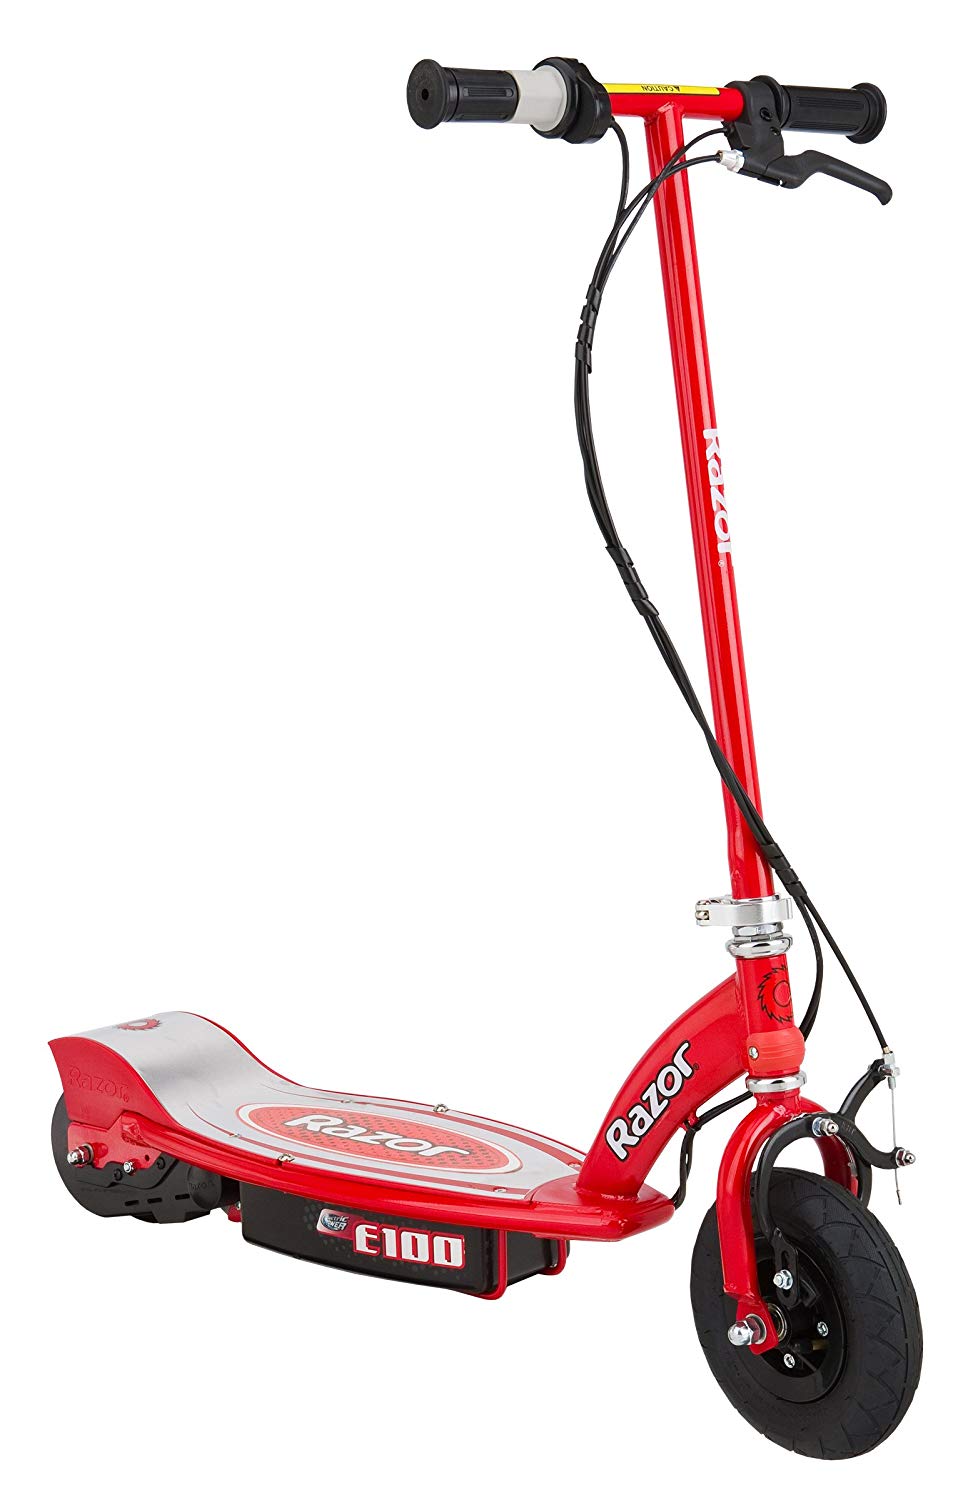 Best Electric Scooters for Kids 2019 - Your Tech Space.com
